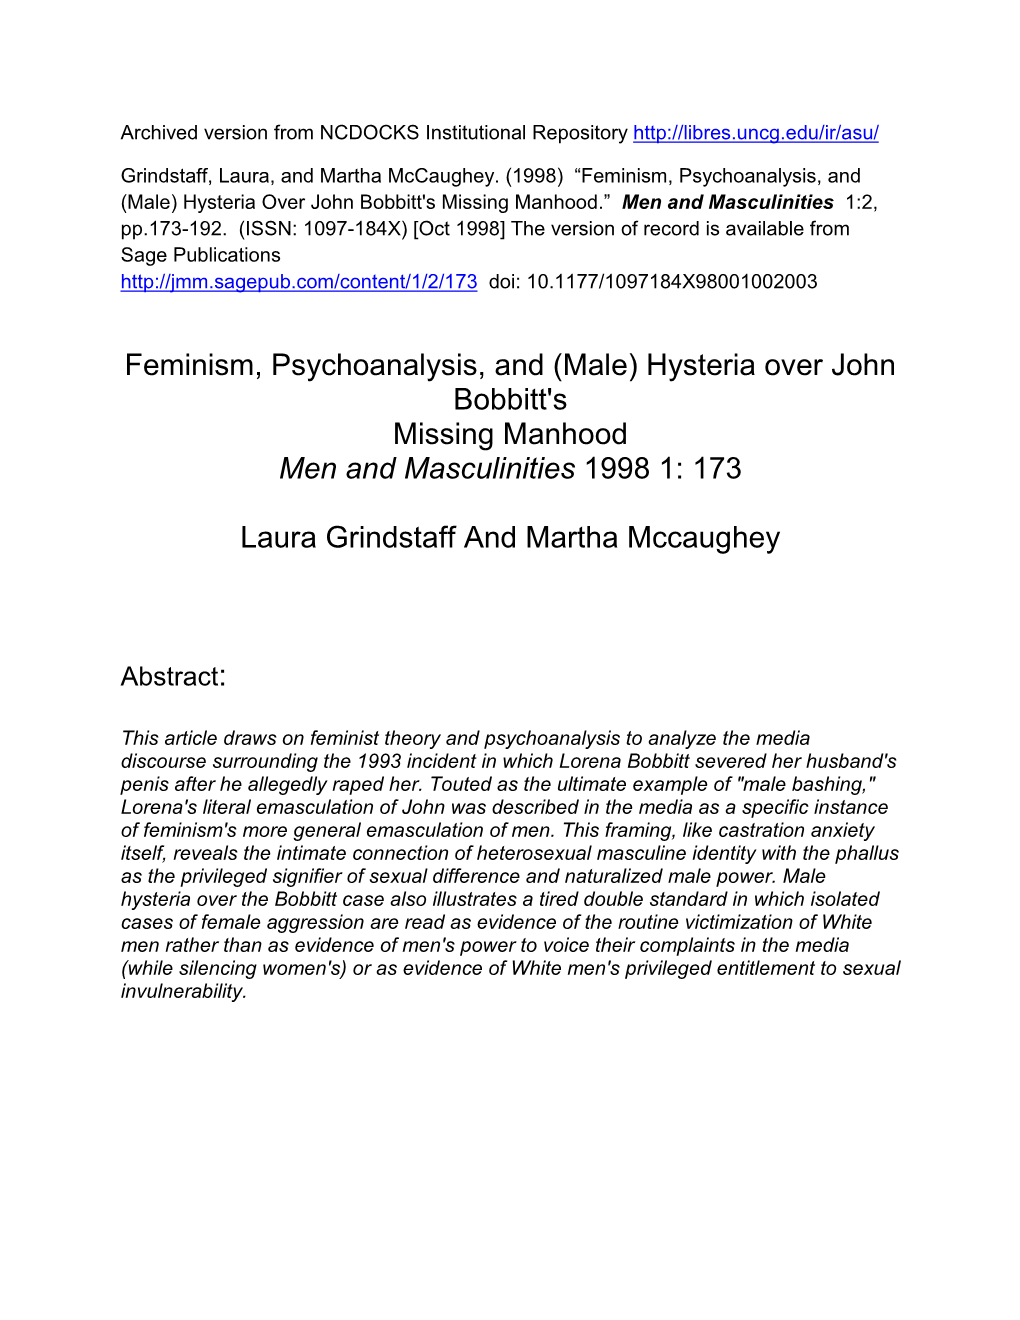 Feminism, Psychoanalysis, and (Male) Hysteria Over John Bobbitt's Missing Manhood Men and Masculinities 1998 1: 173 Laura Grinds